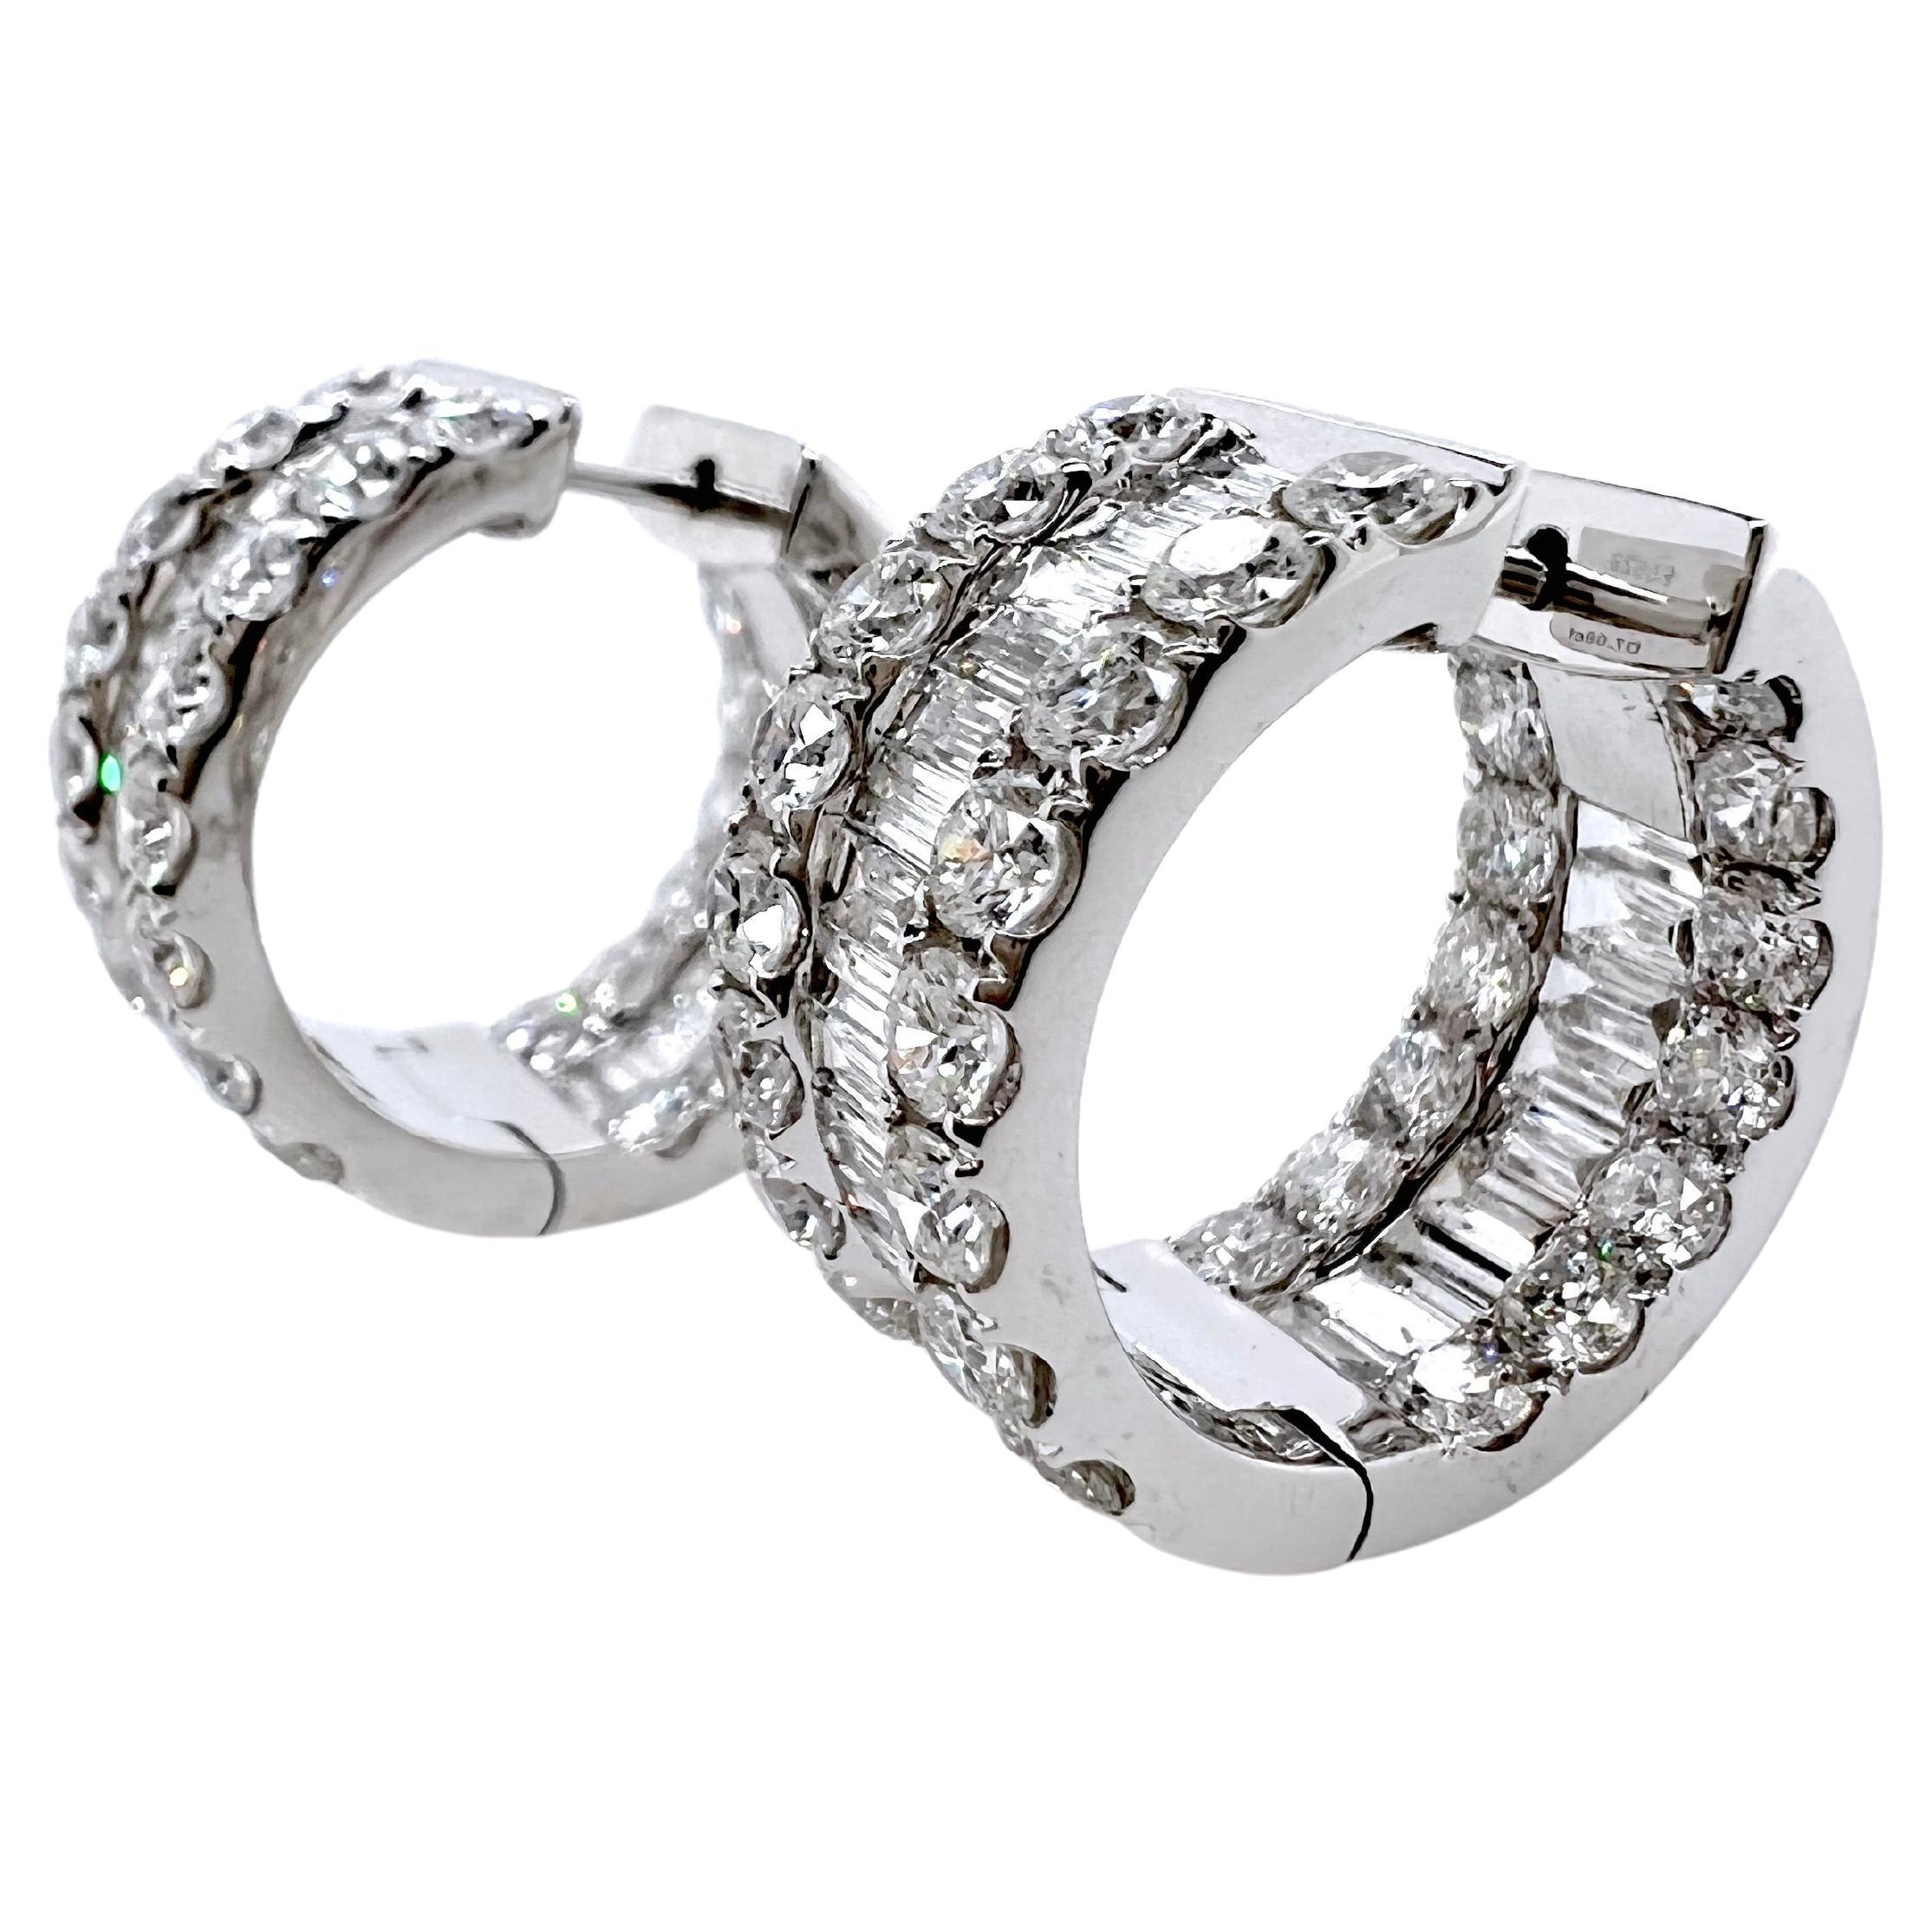 This amazing 18k white gold hoop earrings have large baguette and round diamonds set on the outside and inside part of the hoop.  These are not your typical hoop earrings. These are perfect for smart casual or formal look that will make you stand